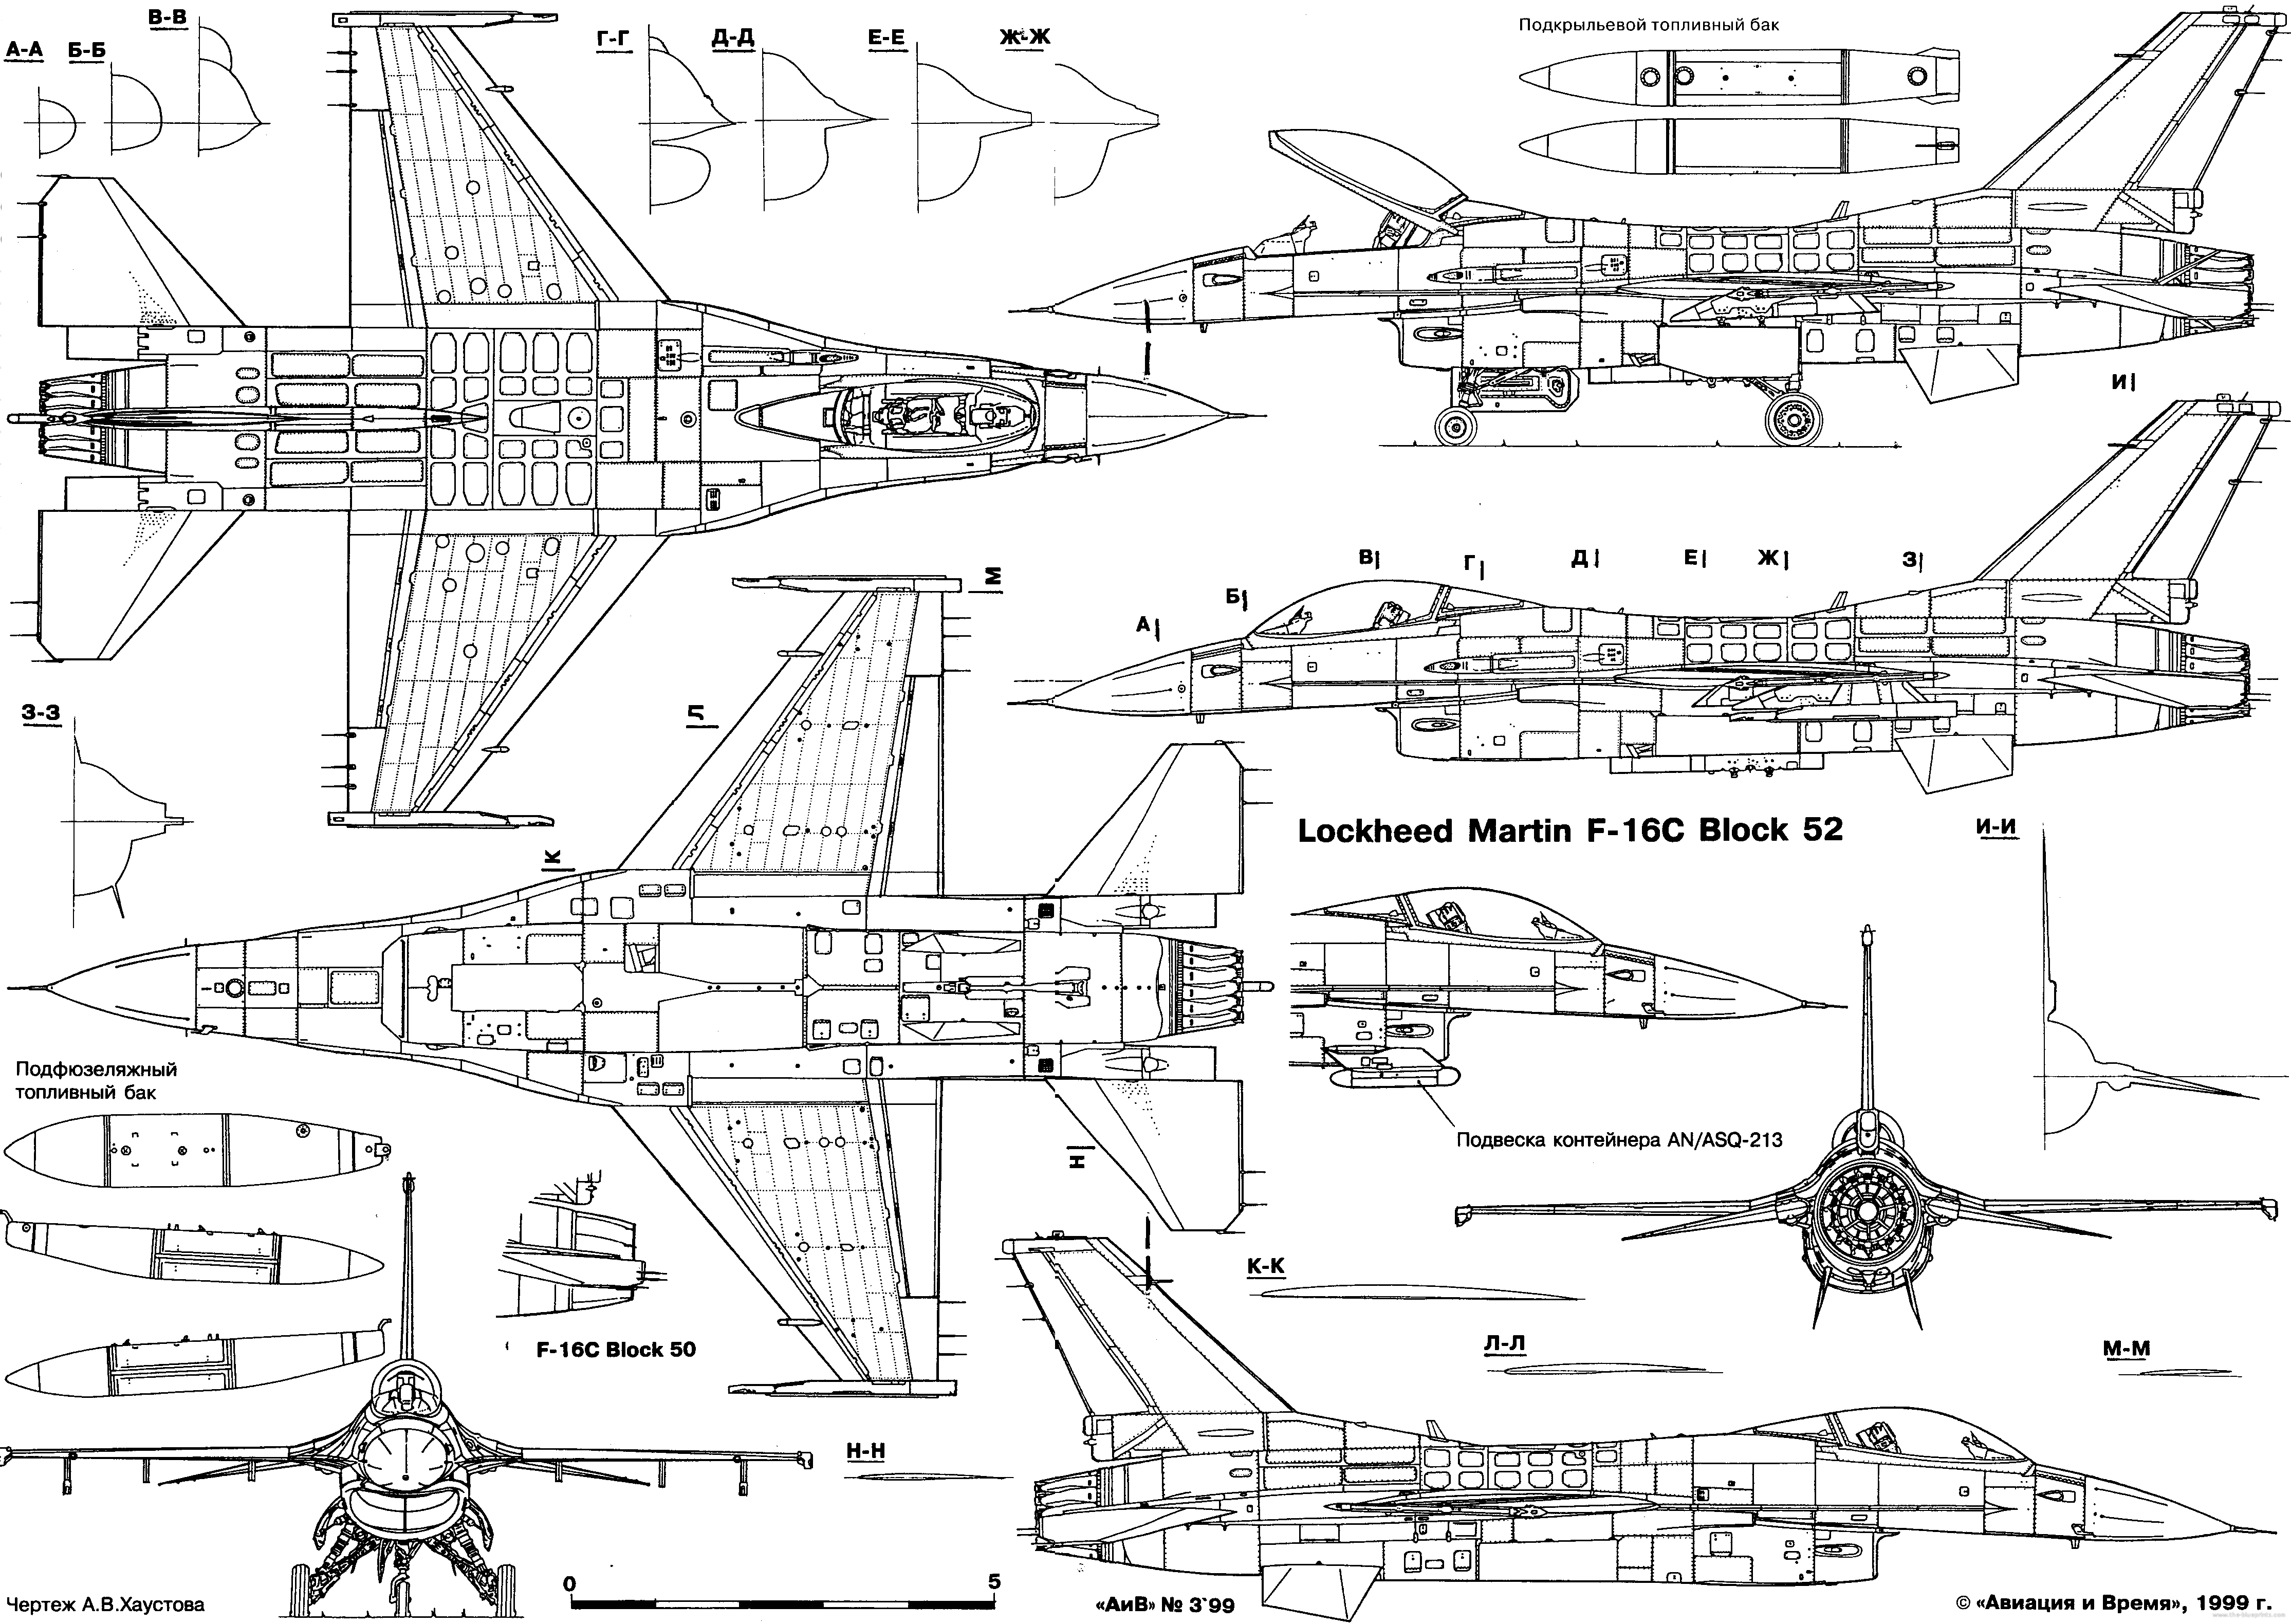 Aircraft modeling and setting up blueprints — polycount